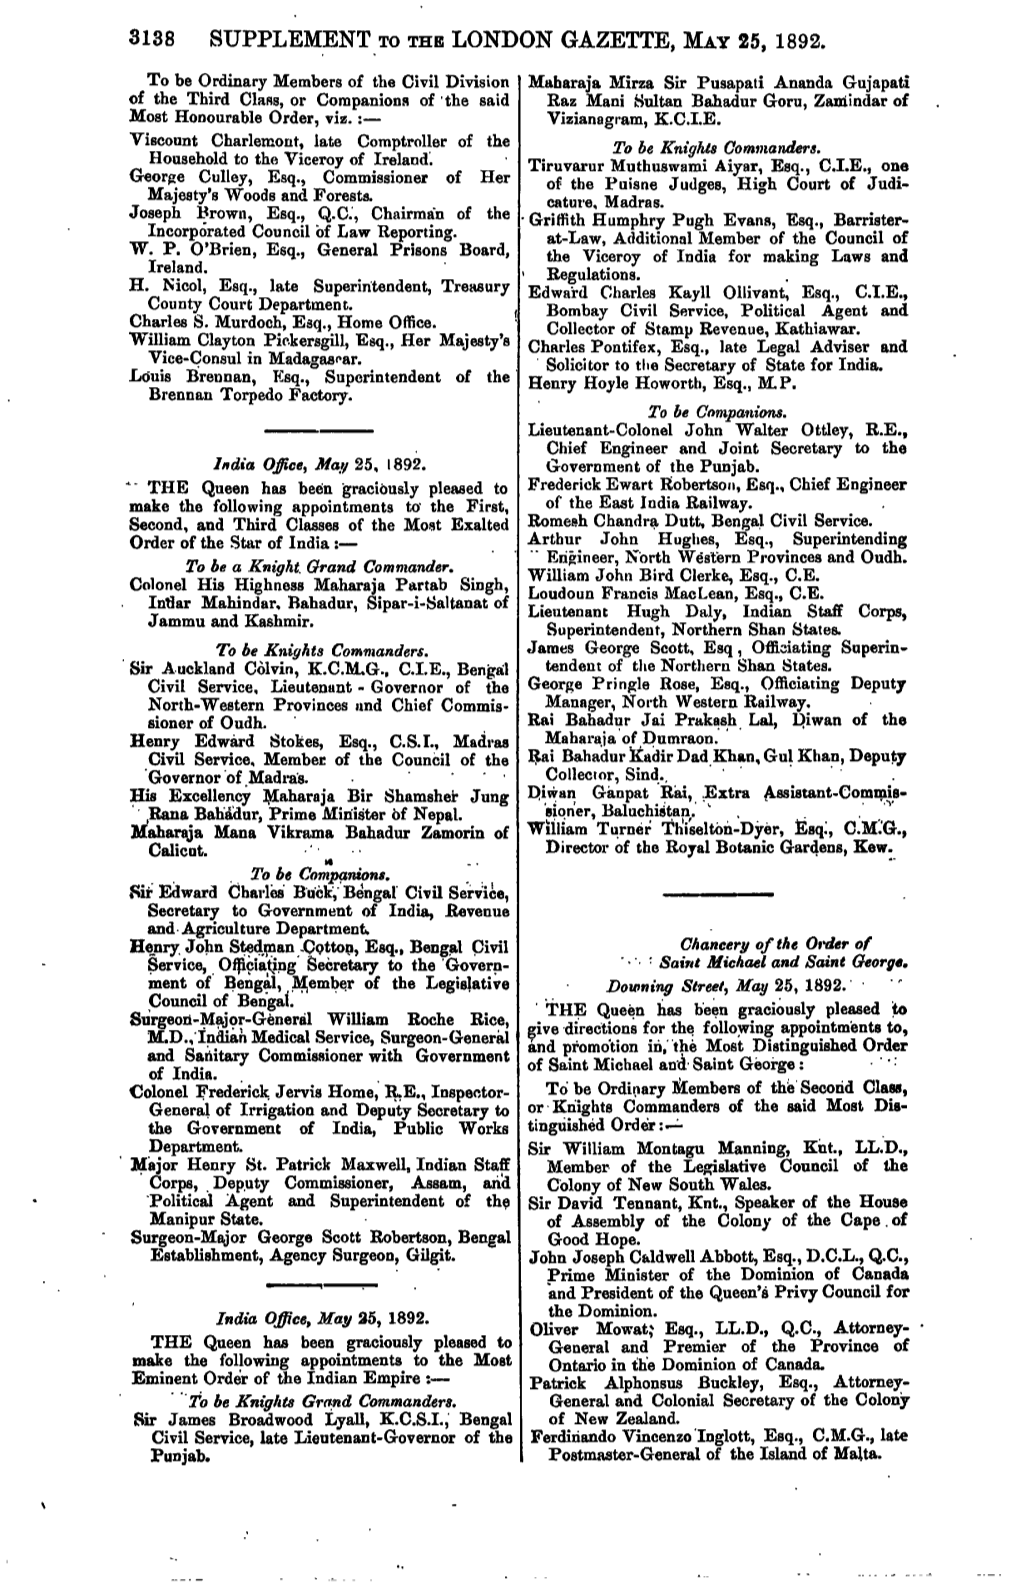 3138 Supplement to the London Gazette, May 25, 1892